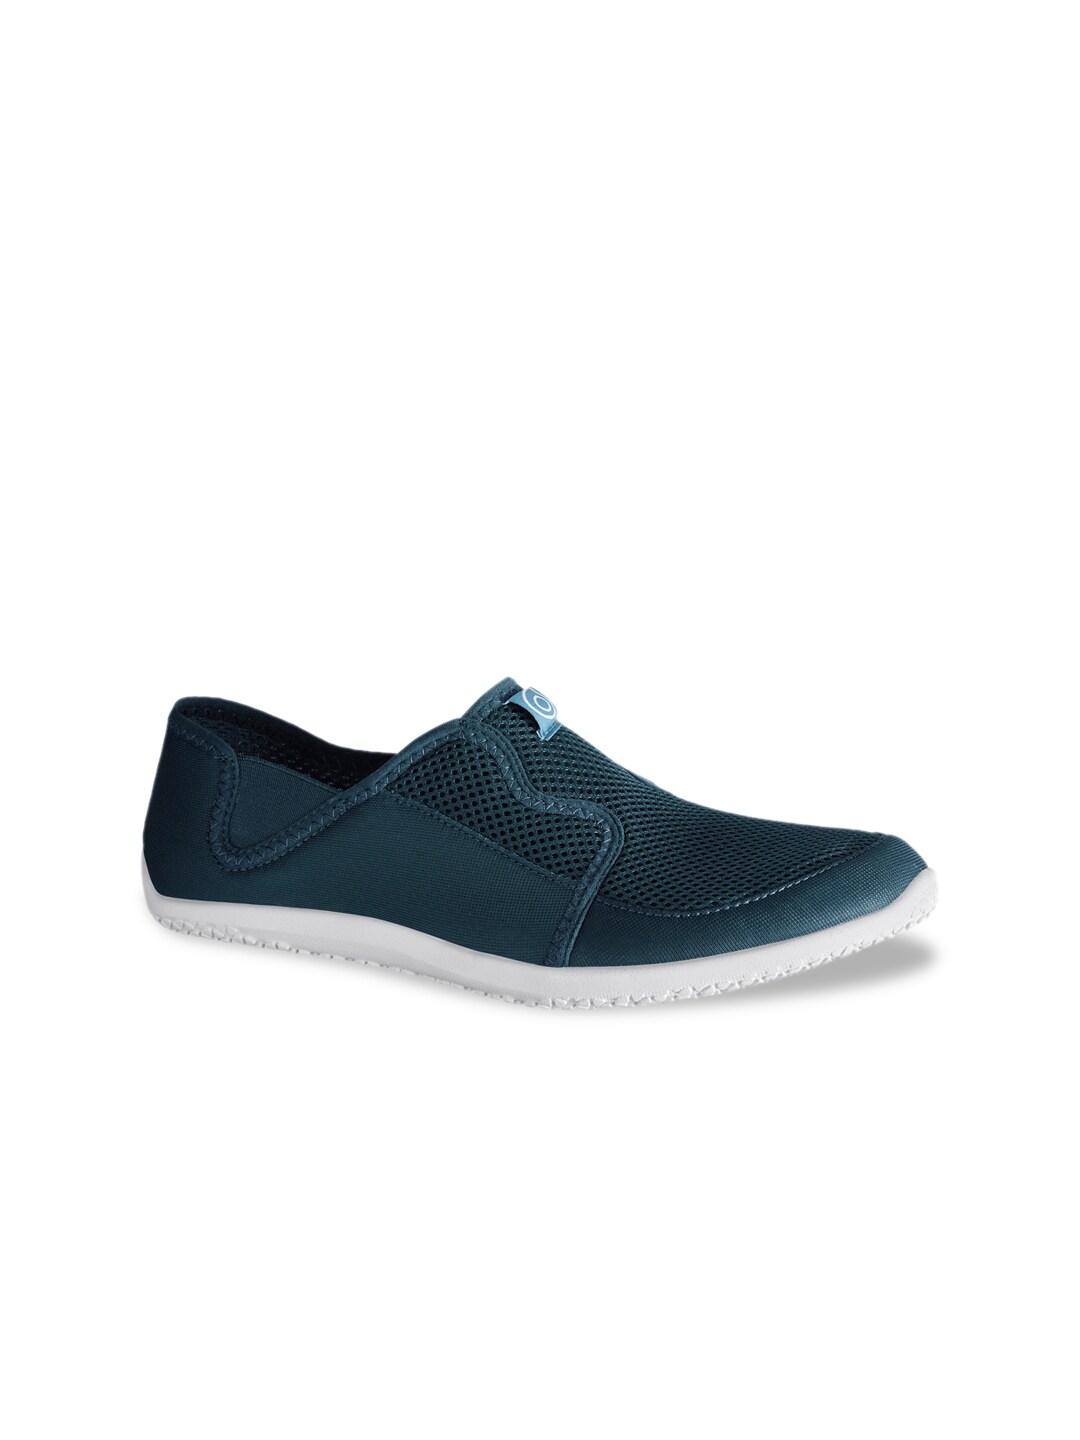 SUBEA By Decathlon Unisex Teal Blue Aqua Shoes 120 Price in India